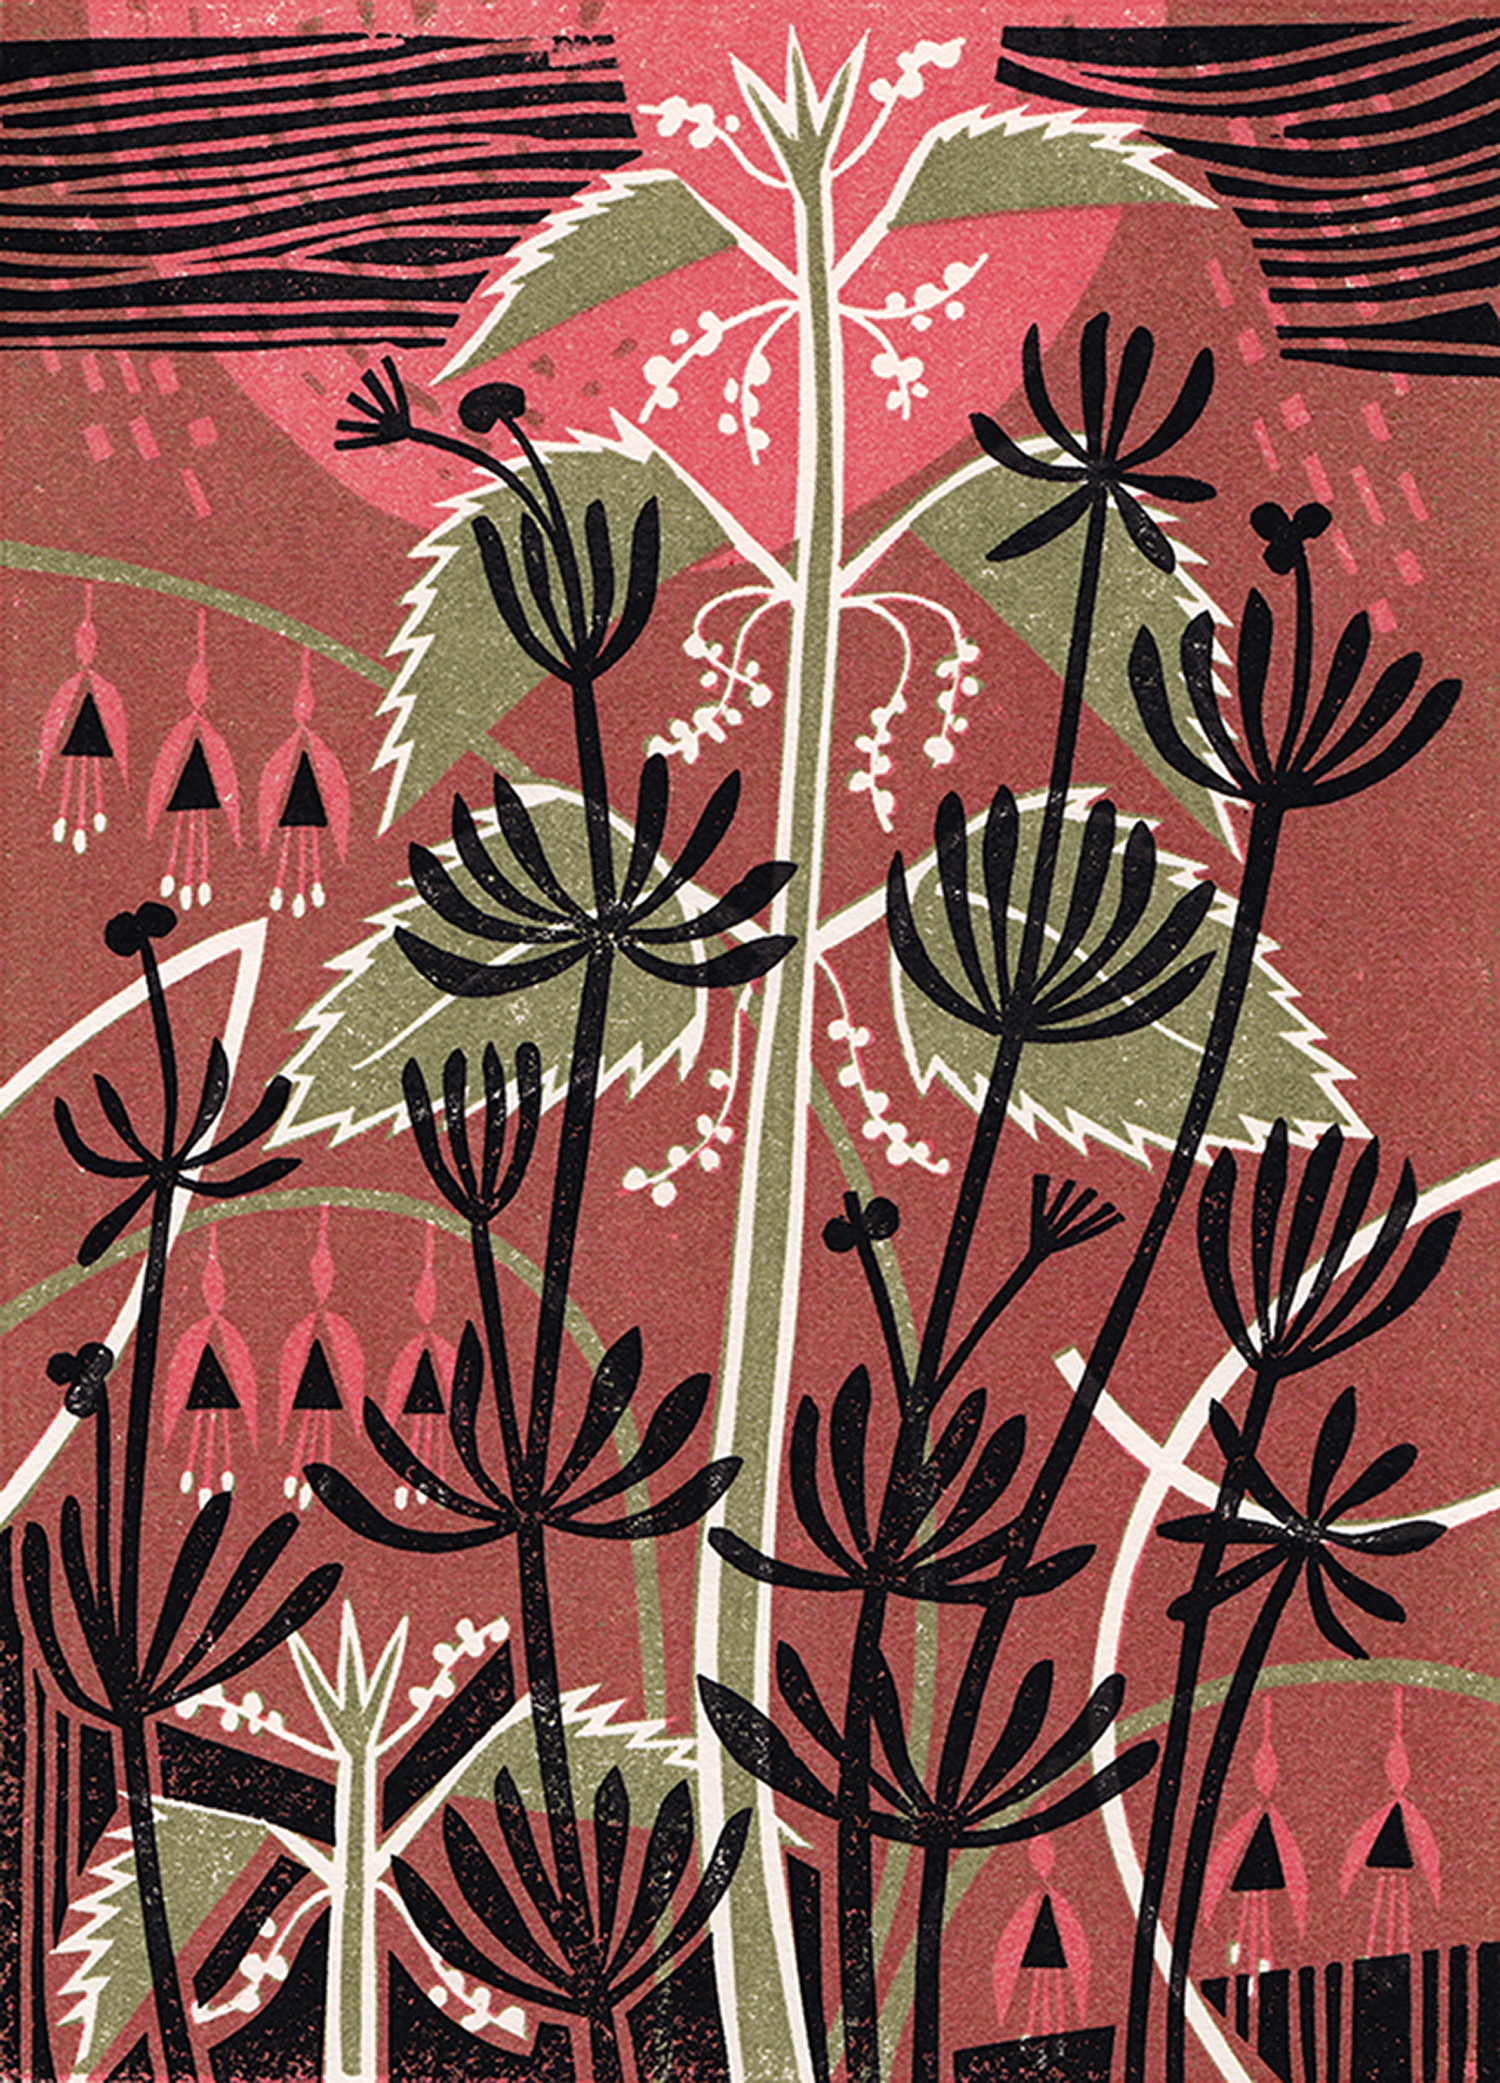 Nettles & Cleavers by Clare Curtis